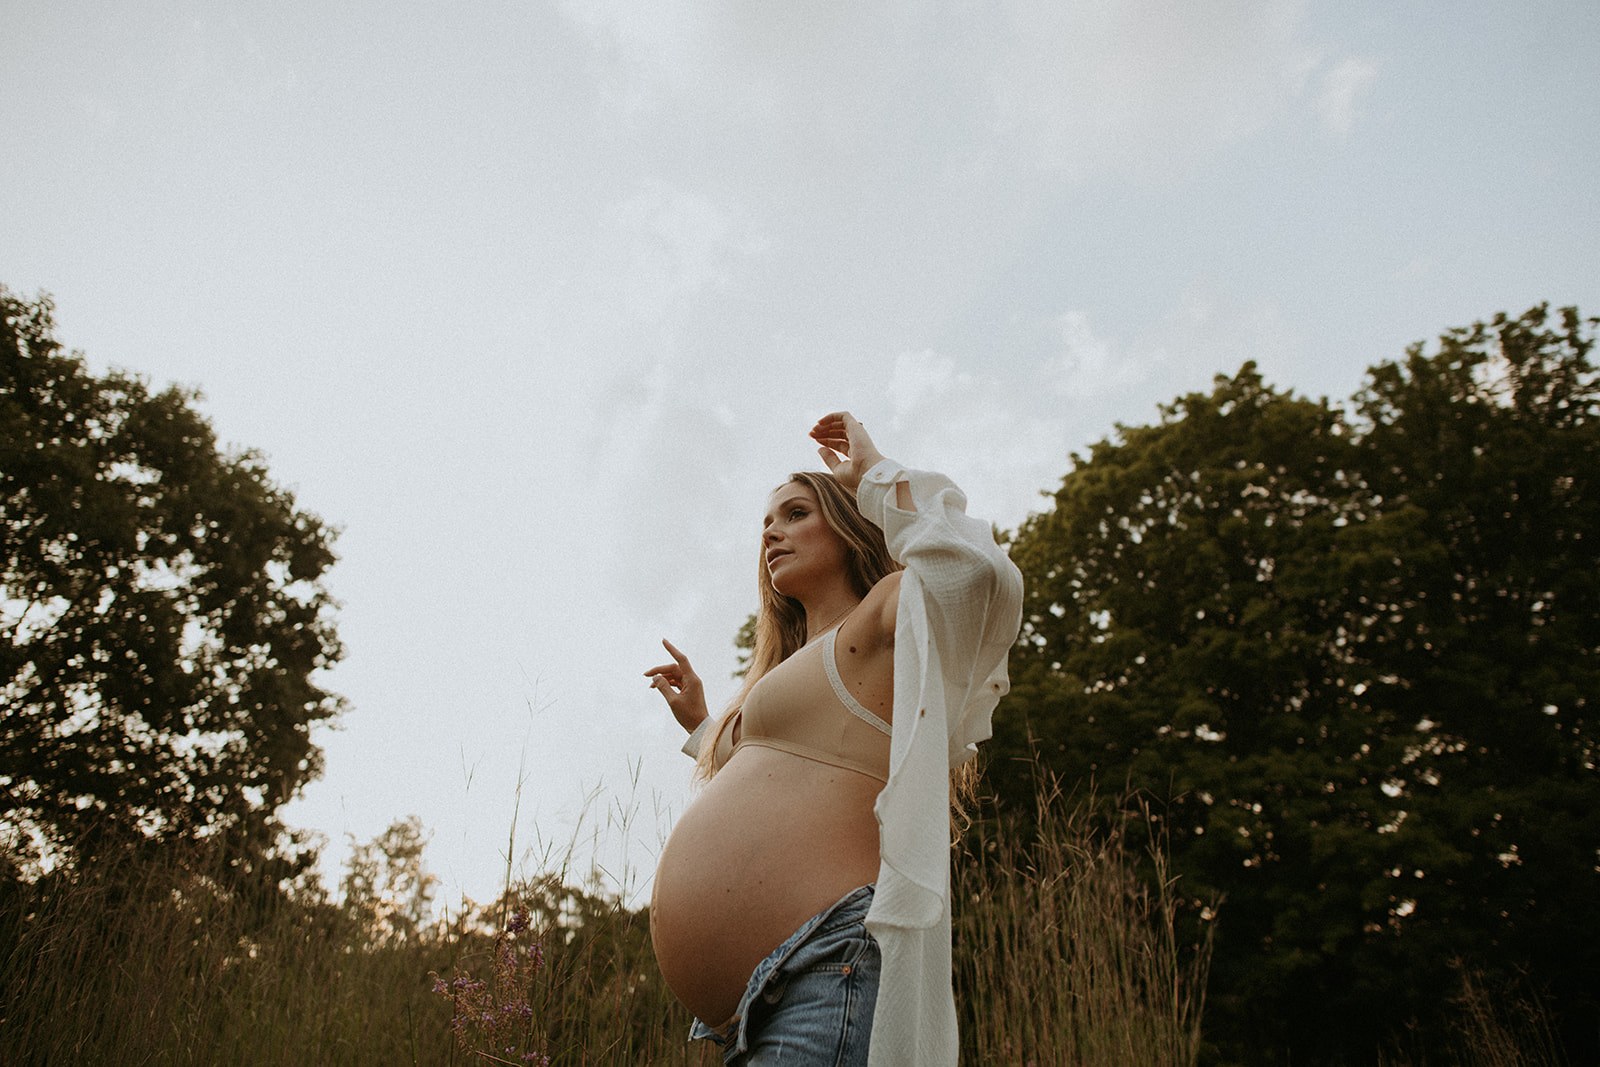 Pregnant woman poses in an oversize button up and jeans for her sunset maternity photoshoot